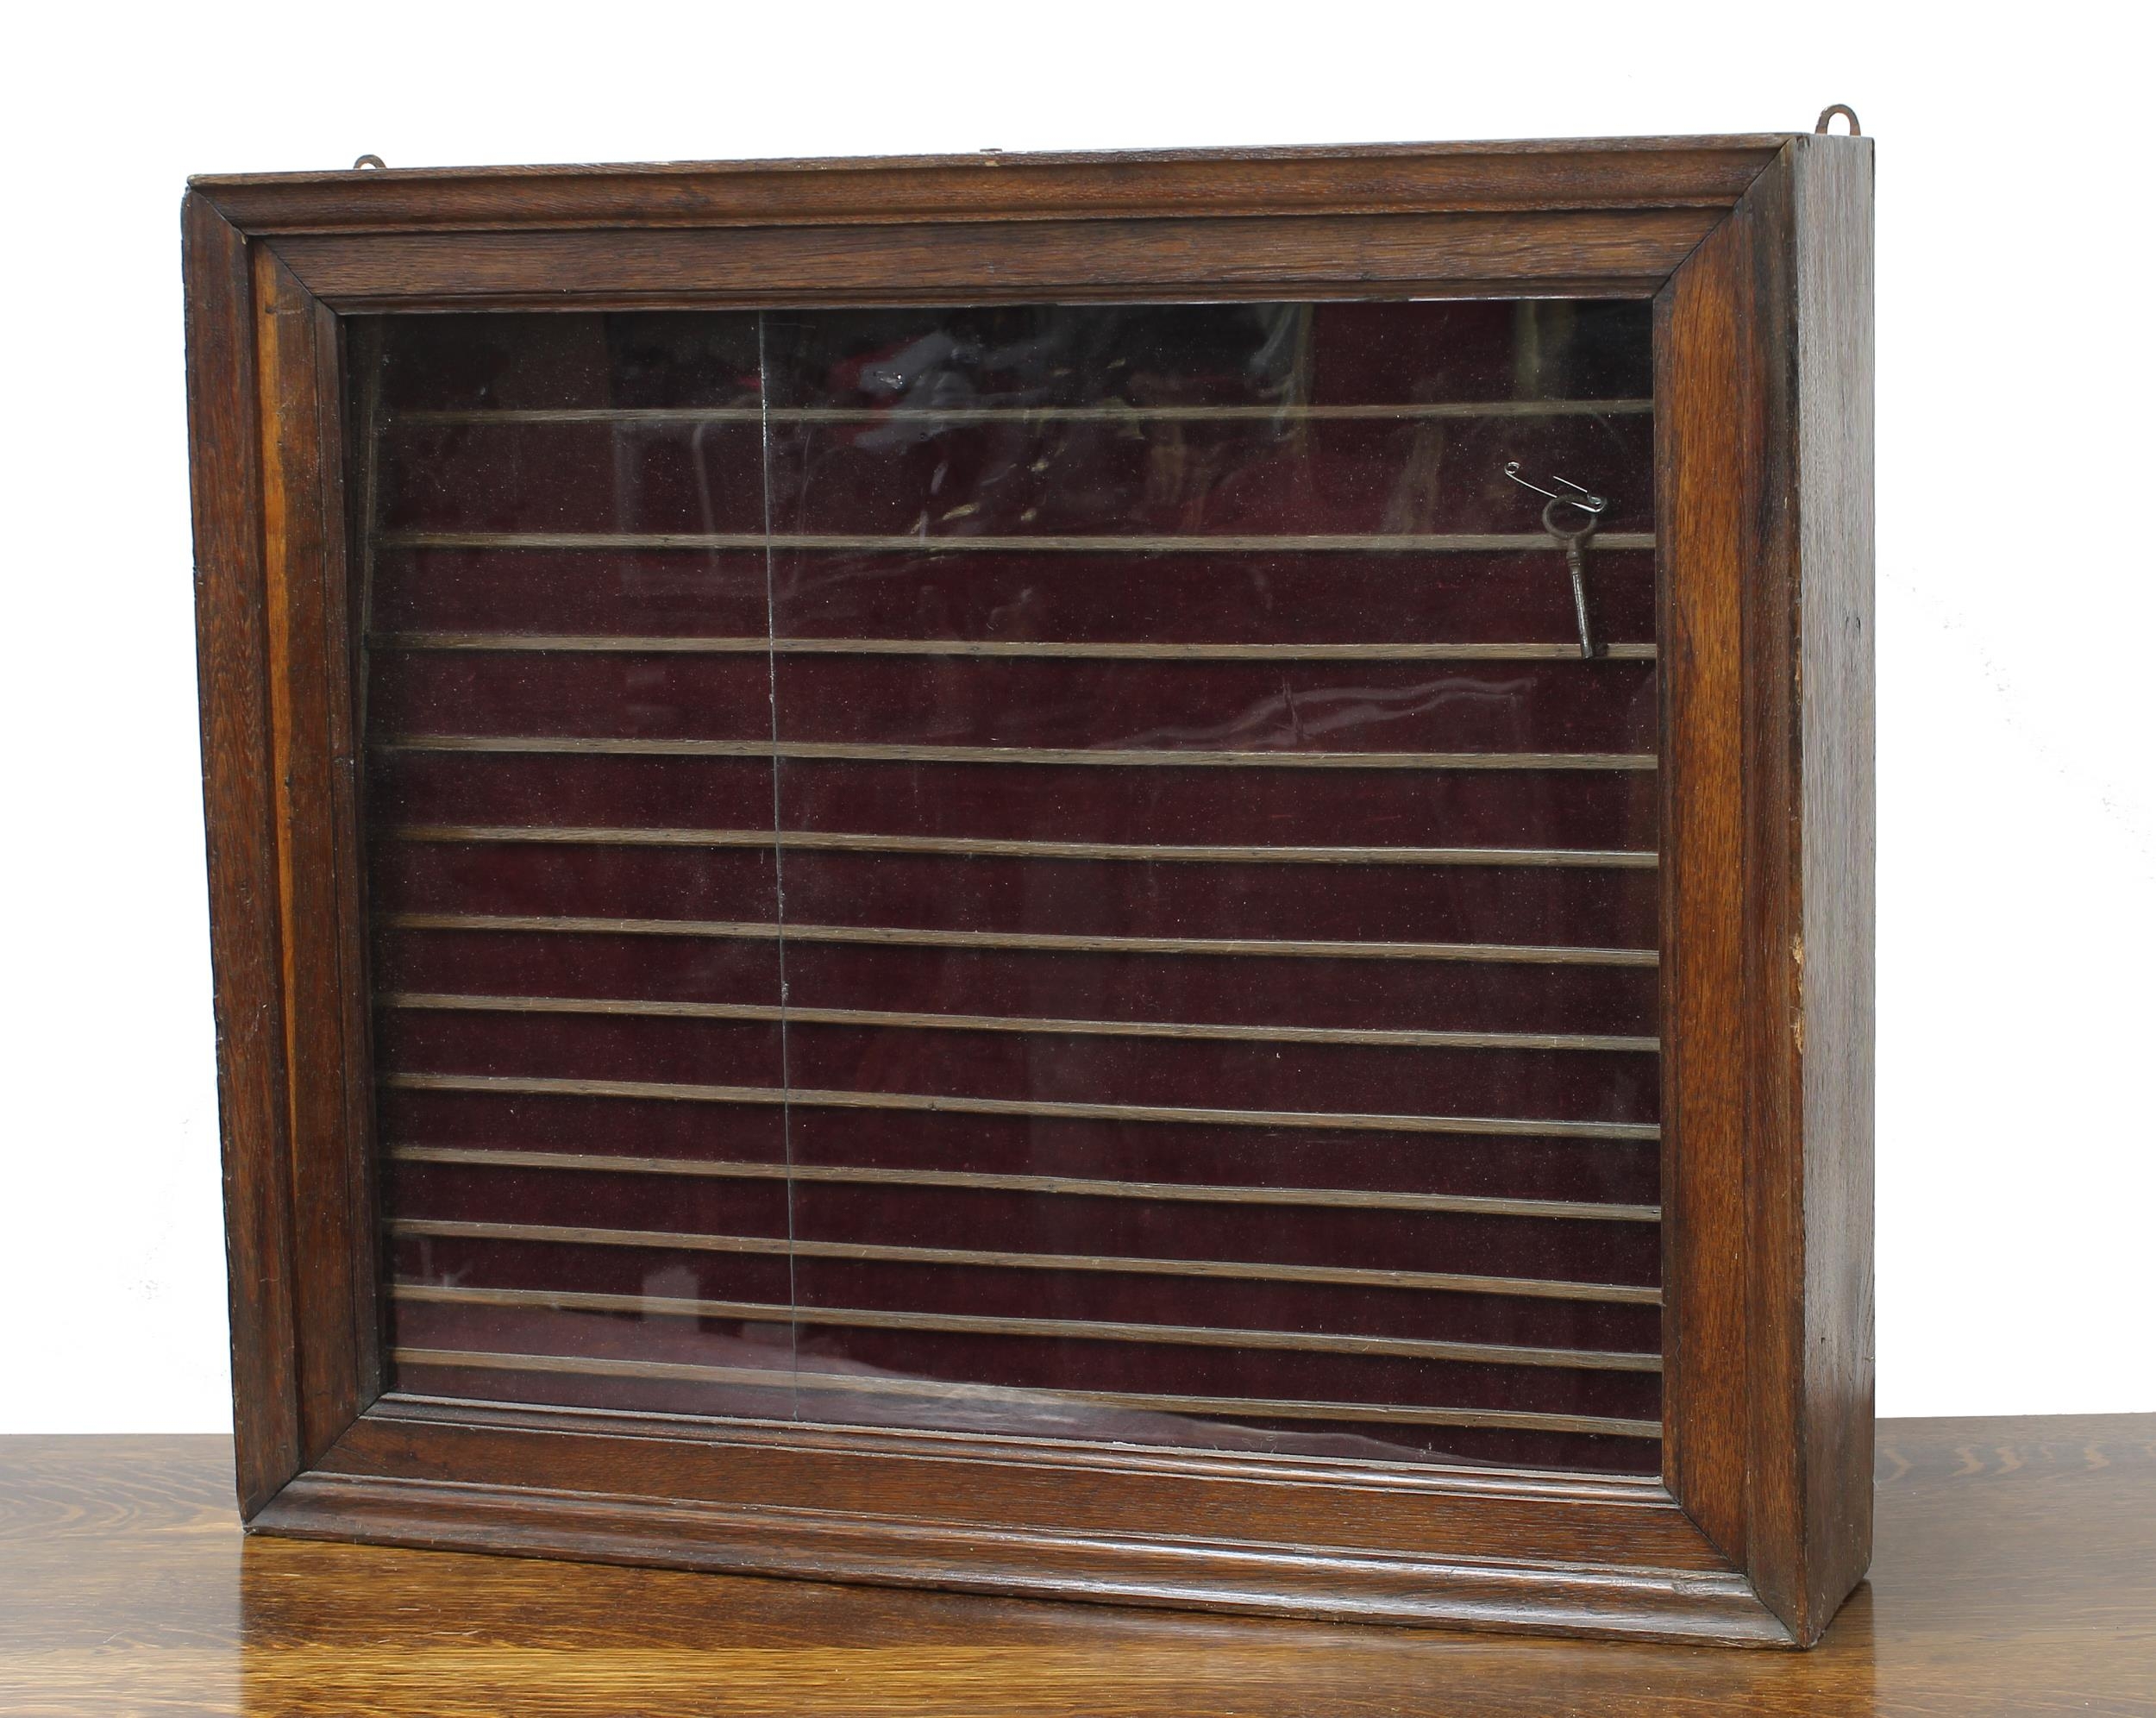 Oak collectors display cabinet, the slide glazed front with tiered lined interior, 26" wide, 4.5"